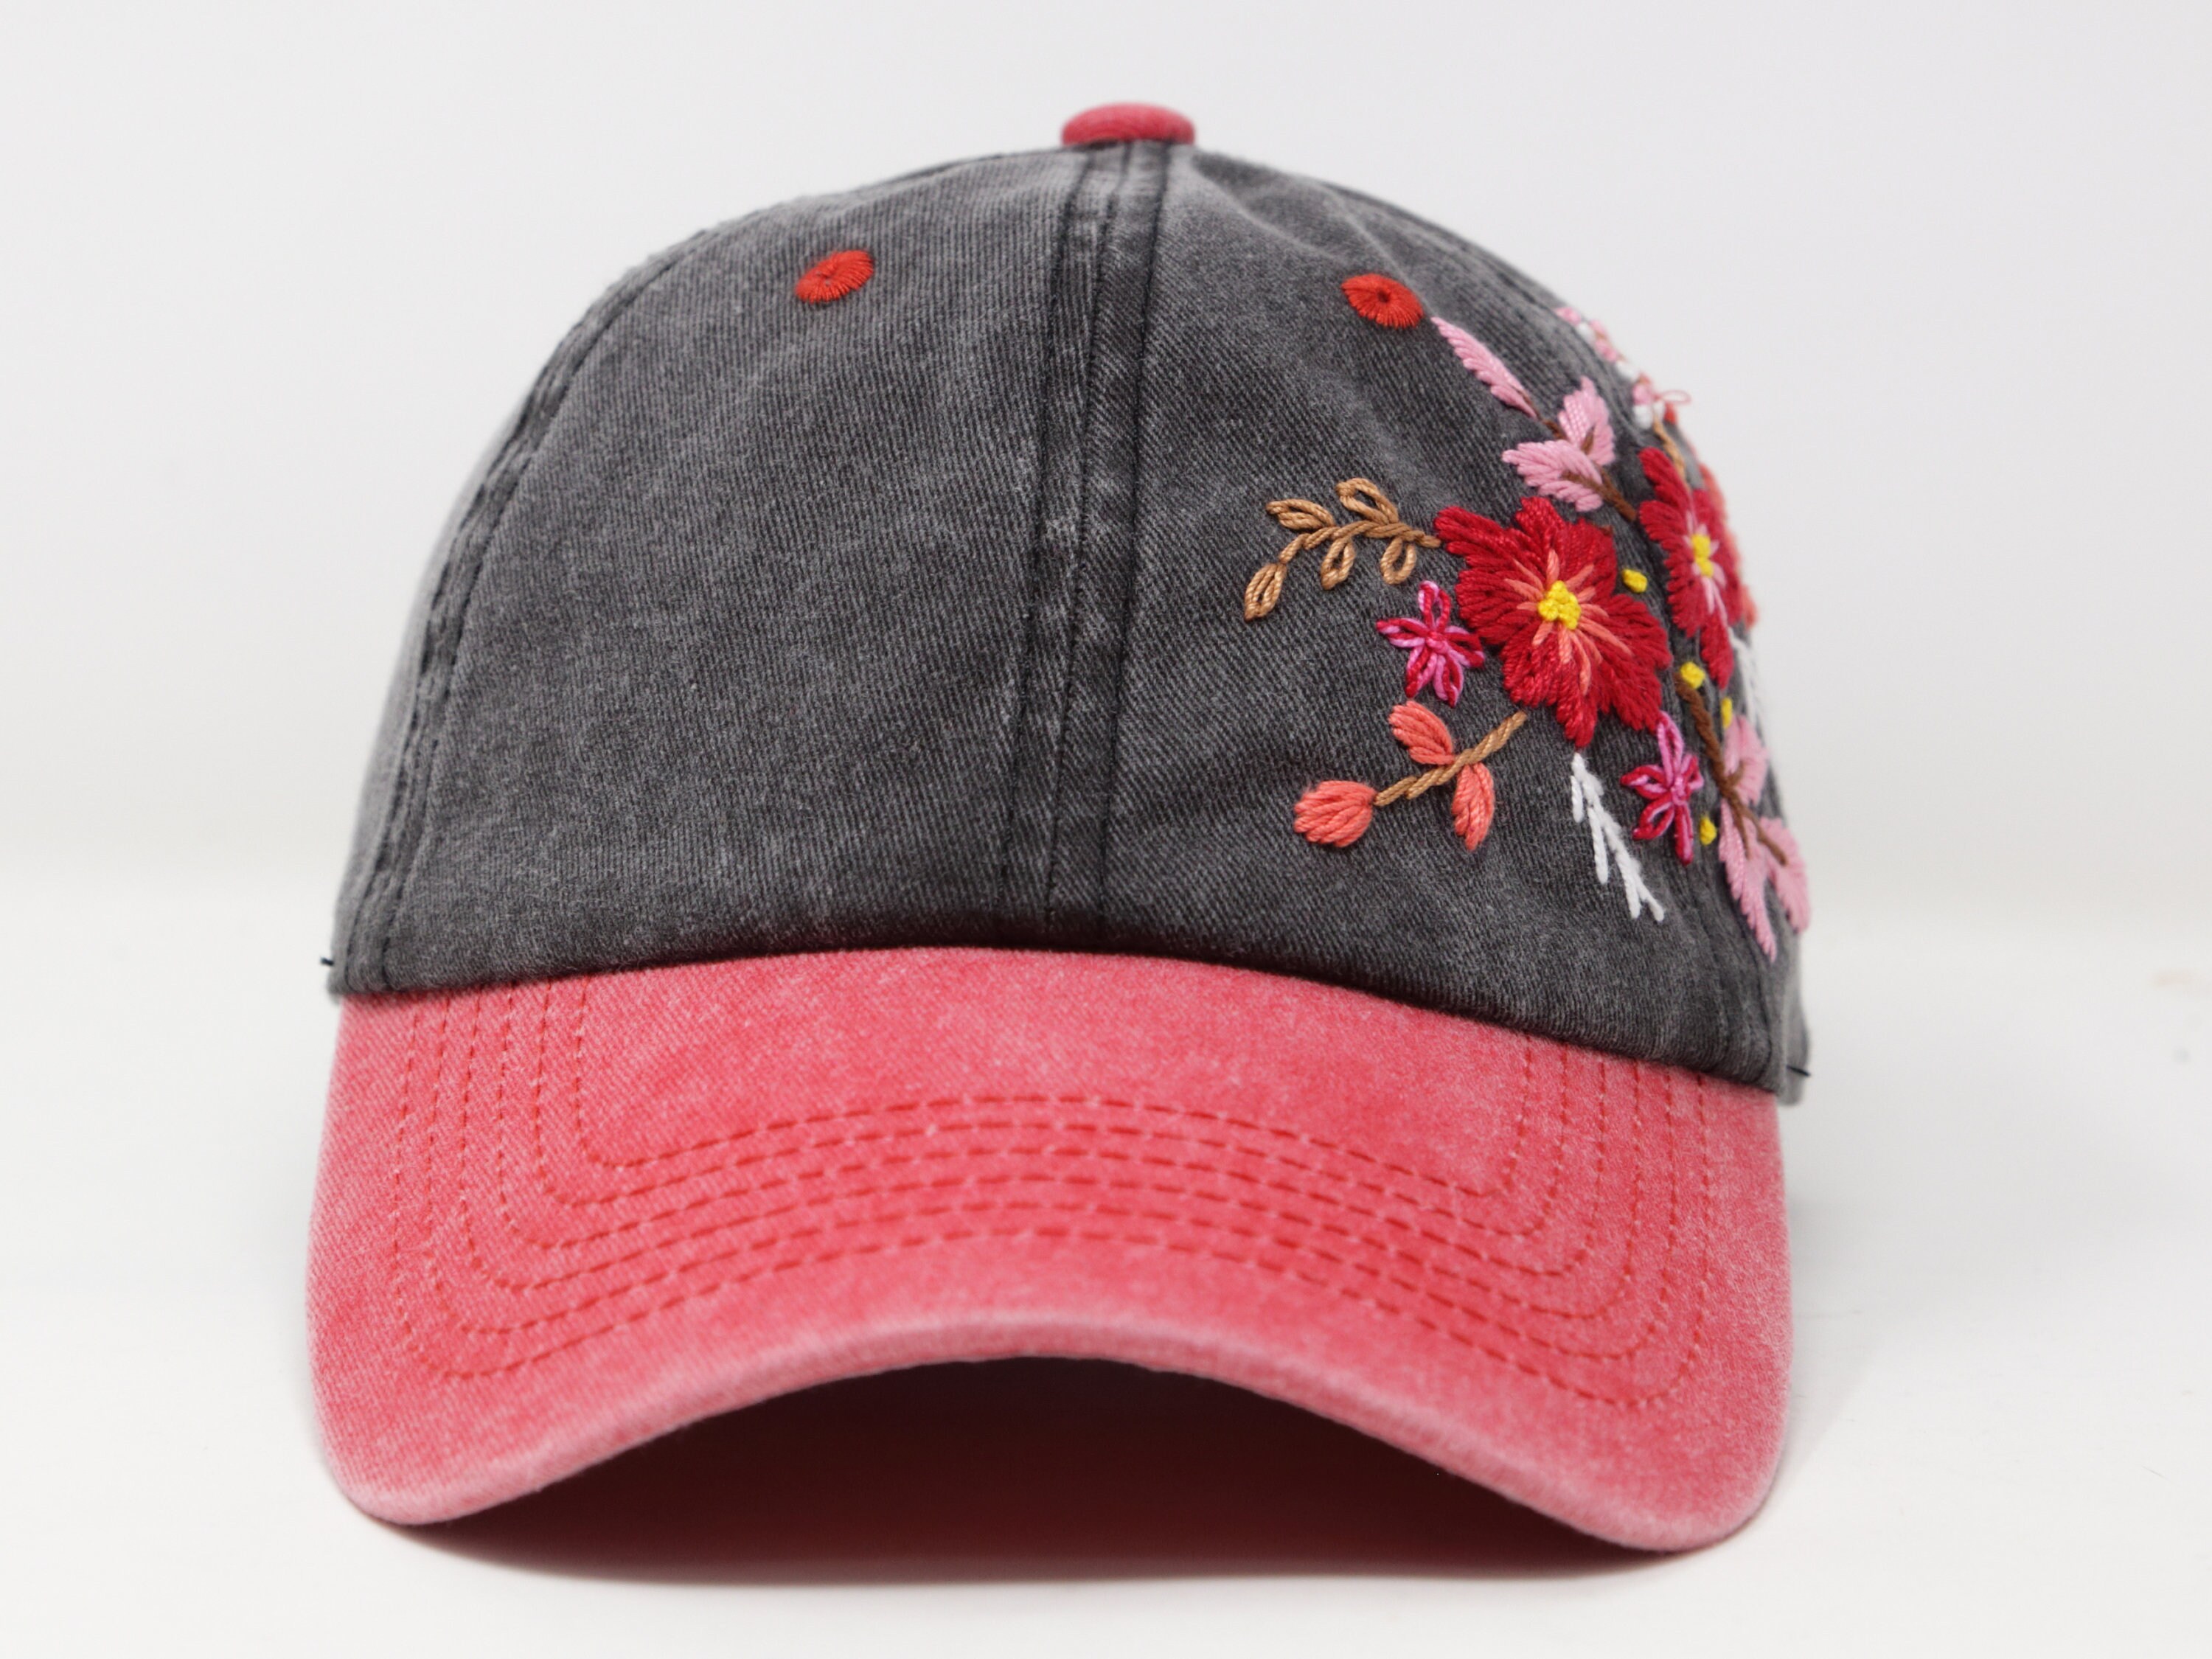 Wash Cotton Baseball Cap Hand Embroidered Flower Hat Cap 2 - Etsy